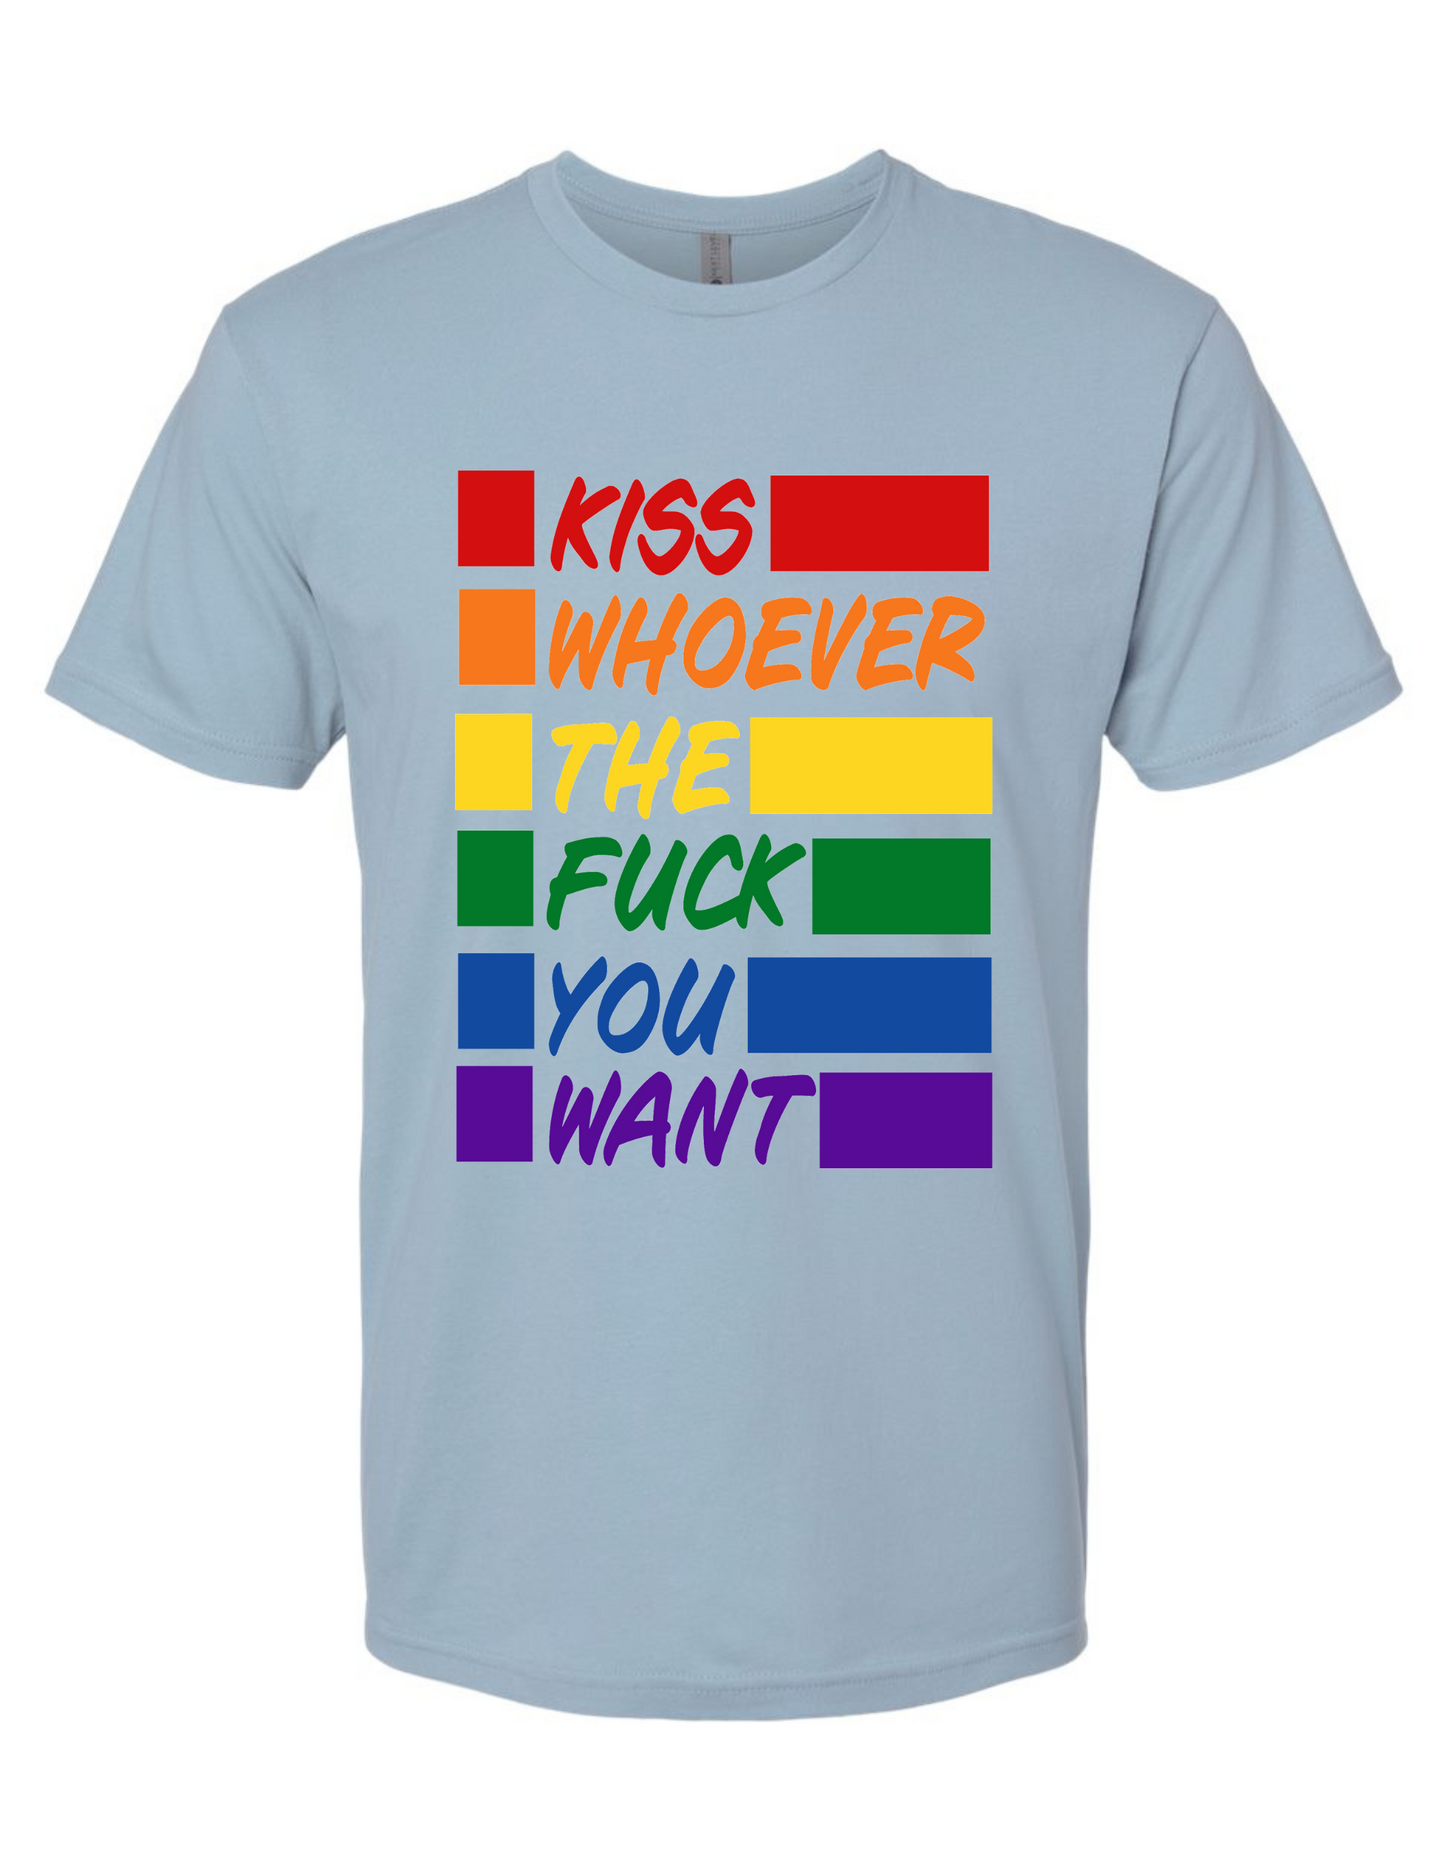 KISS WHOEVER THE FUCK YOU WANT TEE